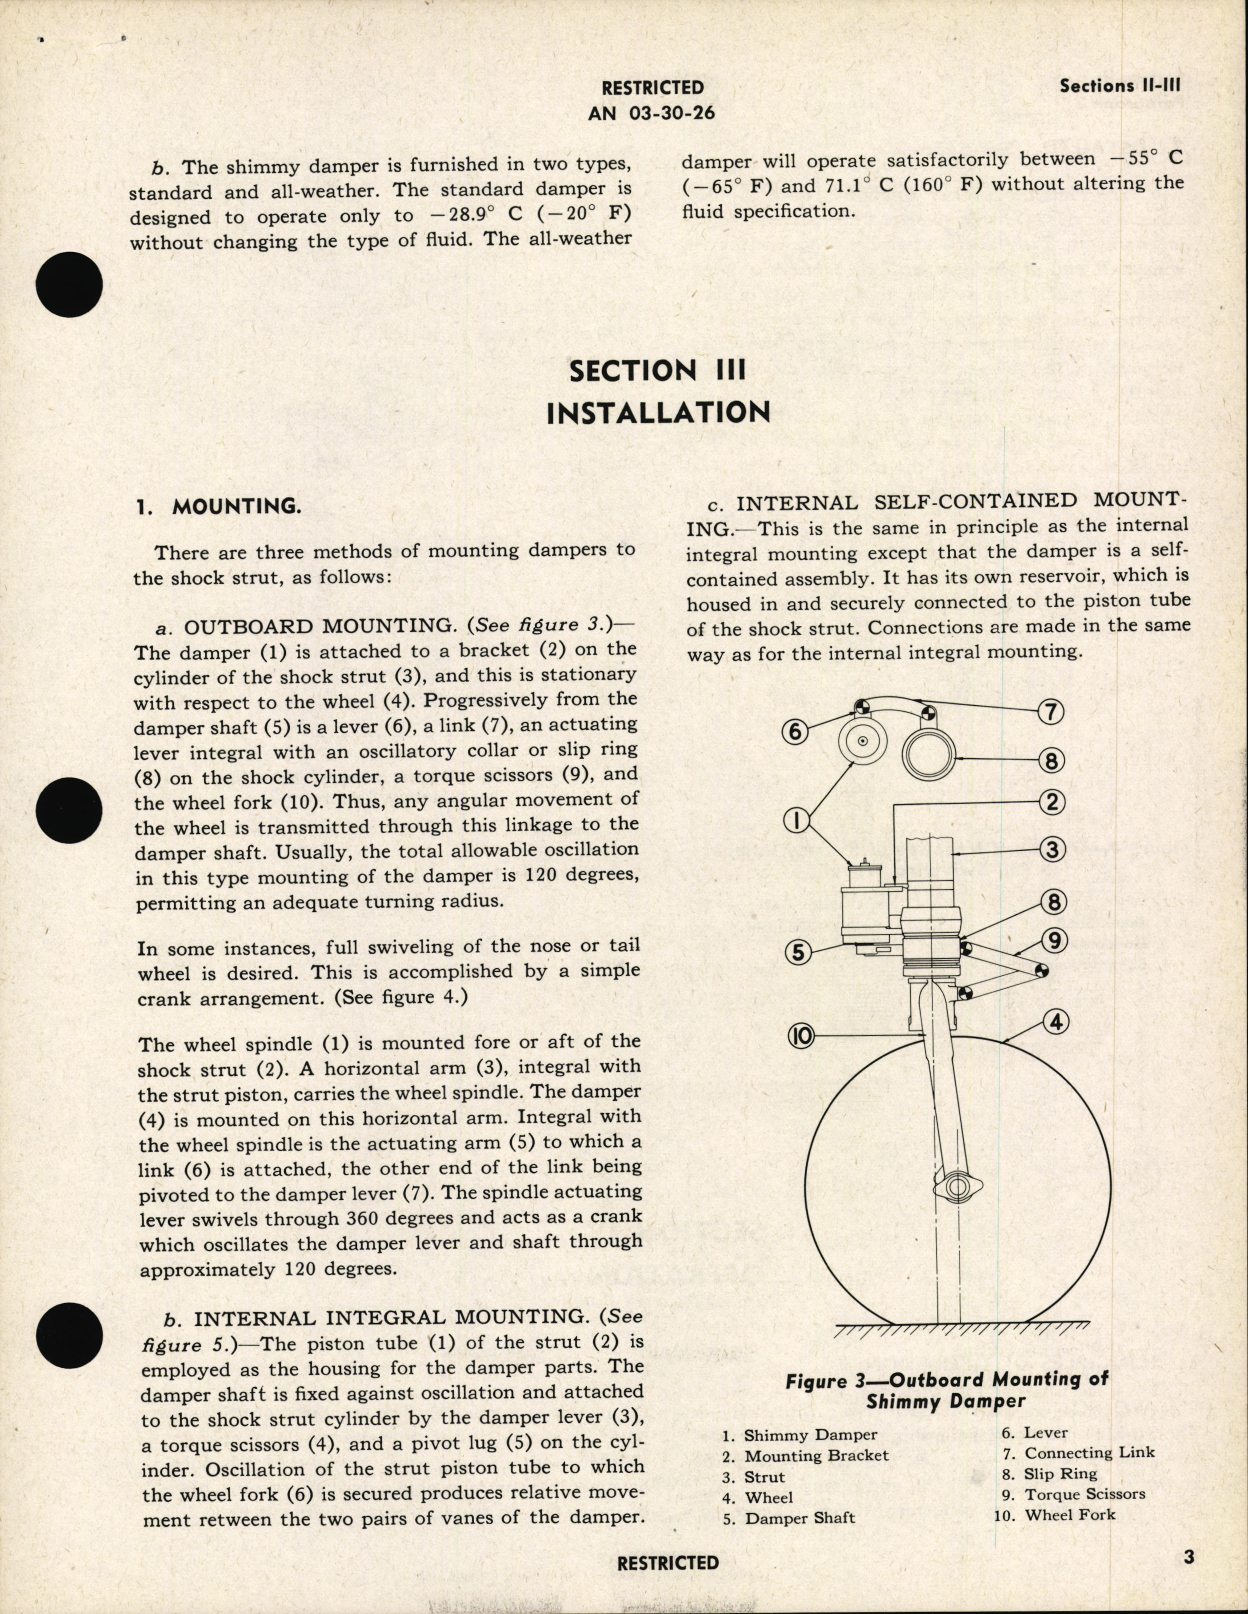 Sample page 7 from AirCorps Library document: Operation, Service and Overhaul Instructions with Parts Catalog for Shimmy Dampers